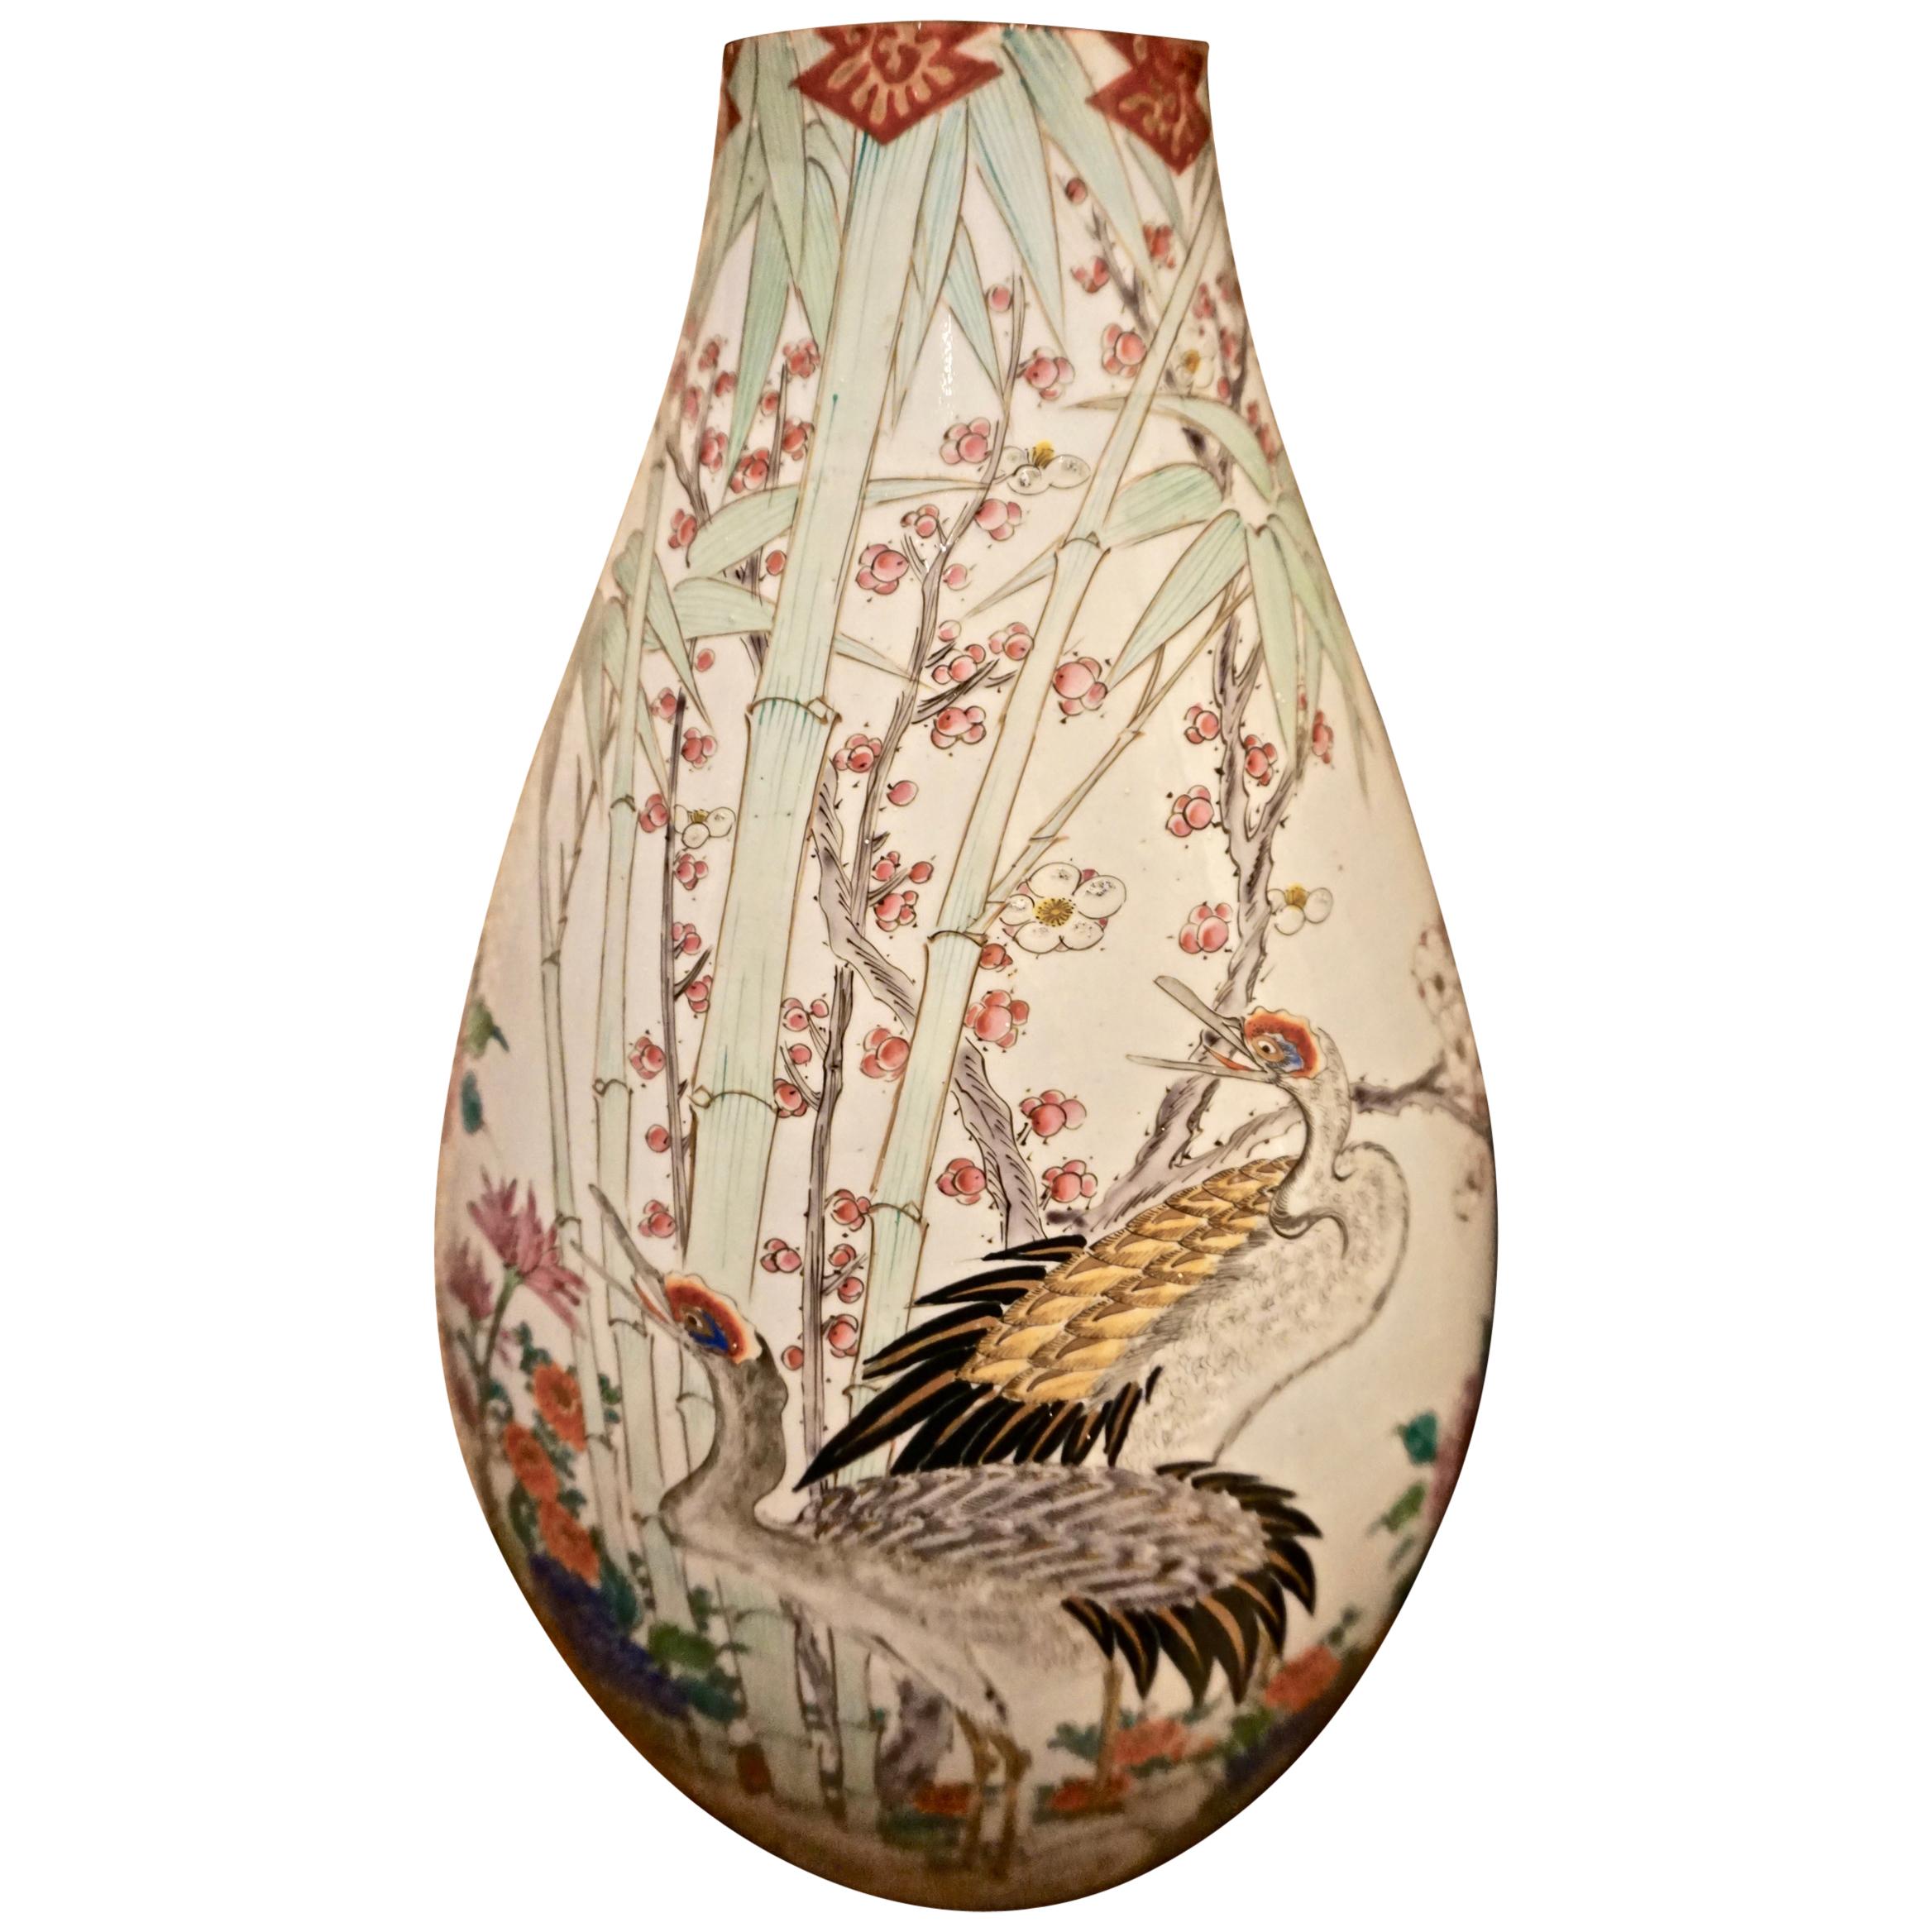 19th Century Handmade Large Japanese Conical Vase with Cranes and Foliage